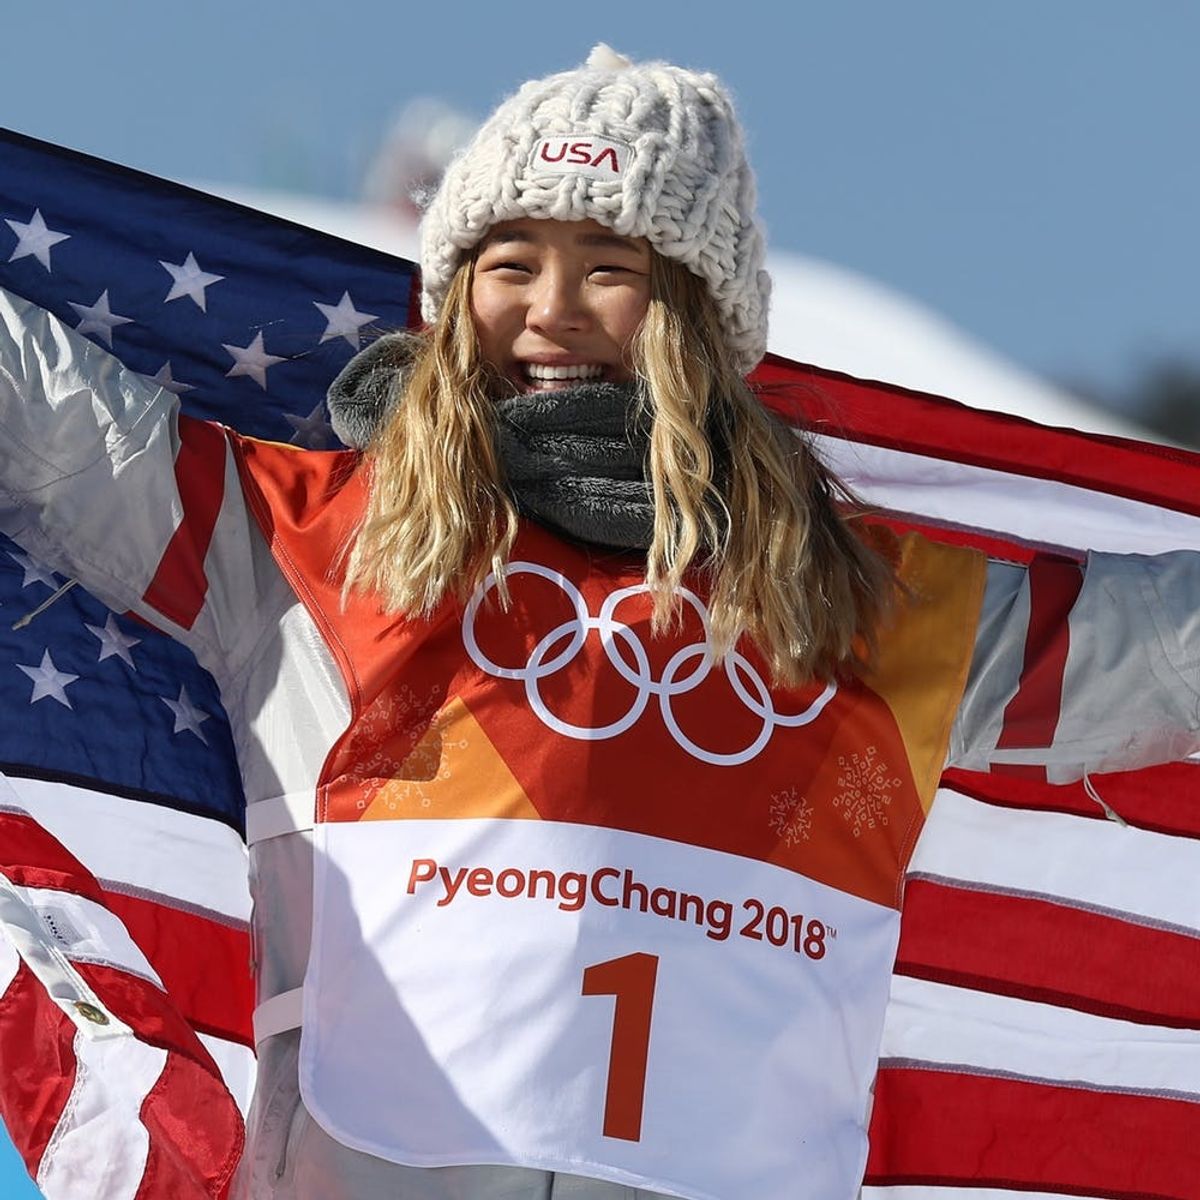 San Francisco Radio Host Patrick Connor Was Fired Over These Remarks About Chloe Kim